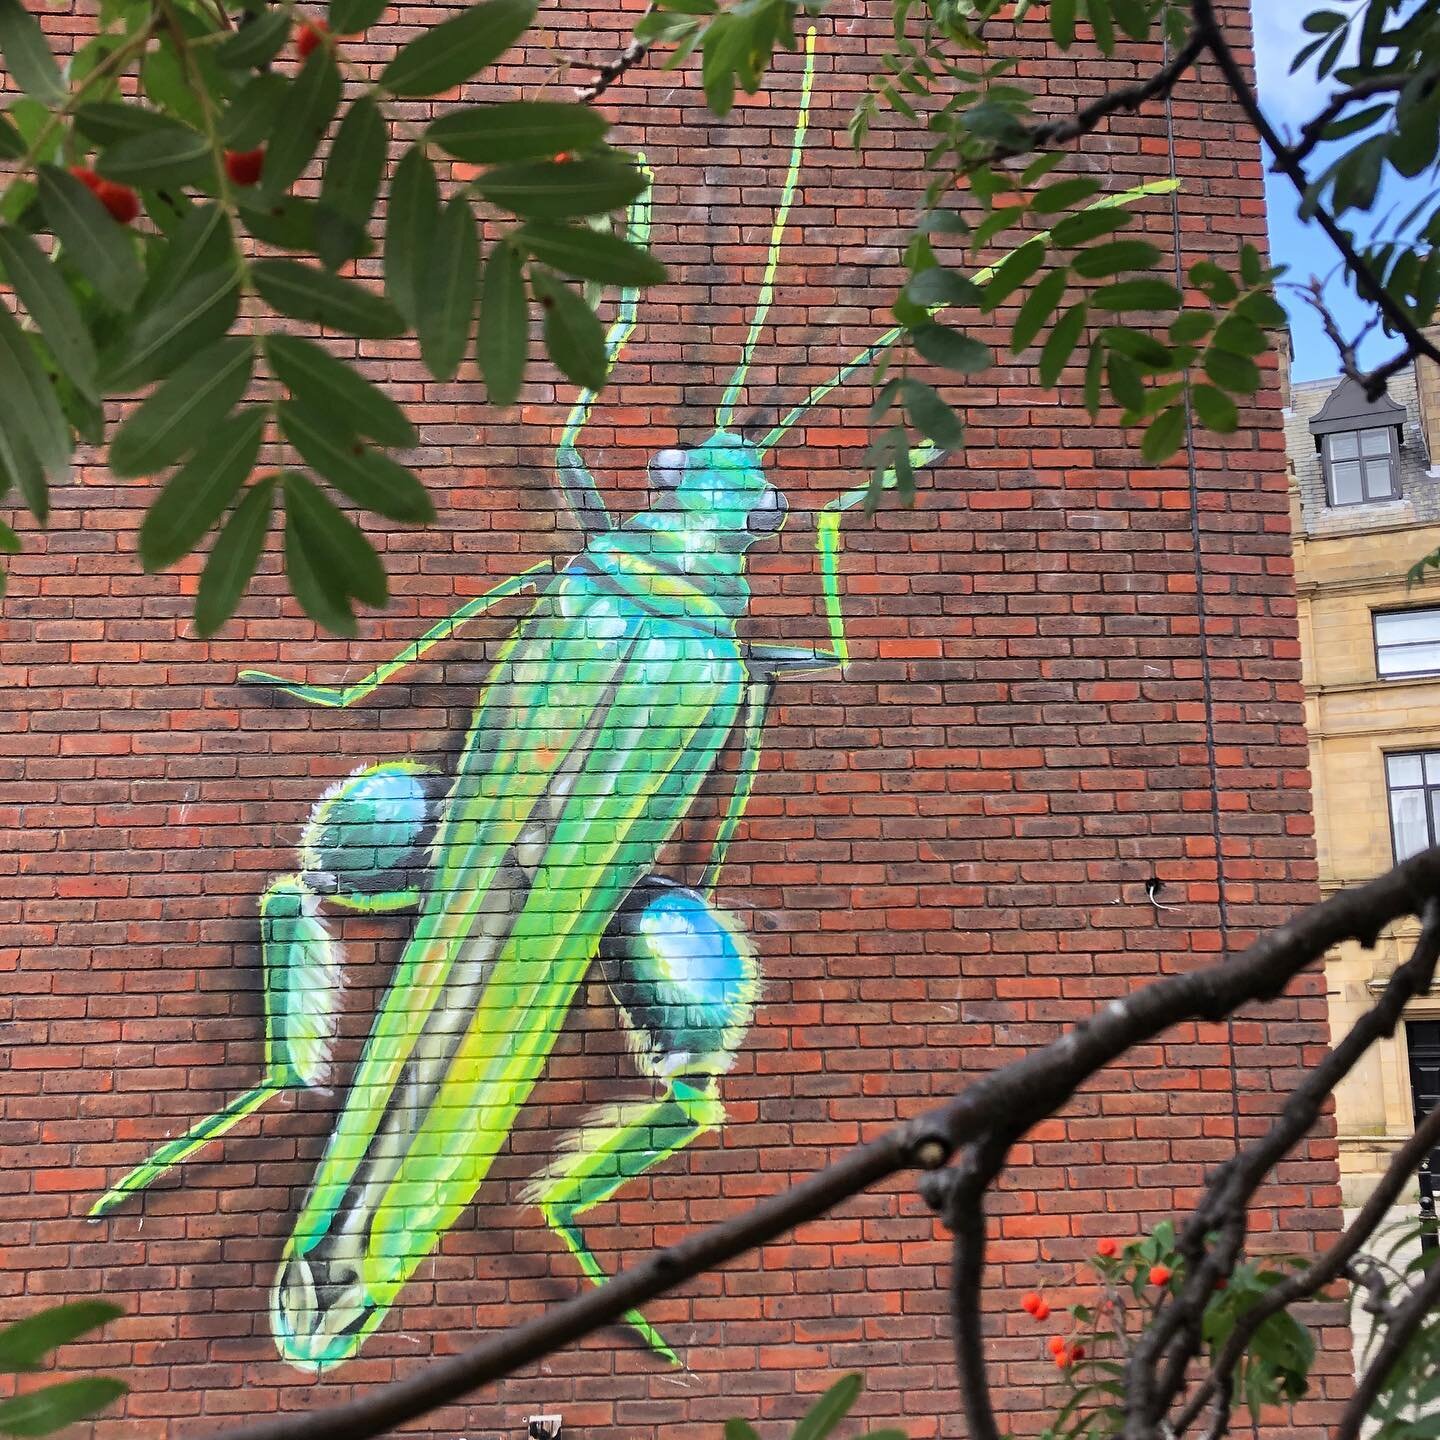 The thick legged flower beetle in Stockport. Raising awareness of the less well known pollinators such as beetles, moths and wasps. Painted by the amazing @paintsmiths 💚